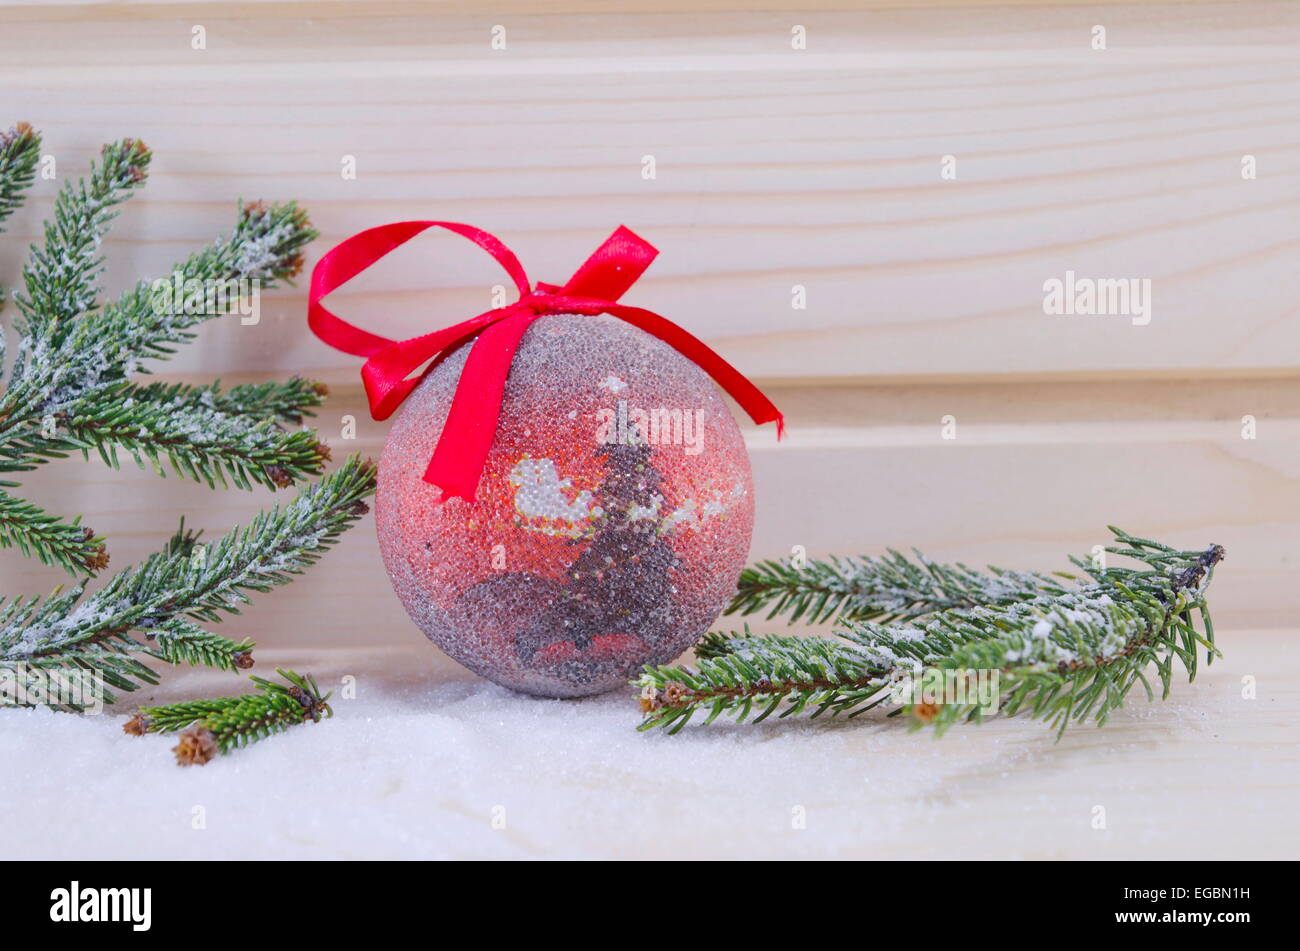 Red vintage Christmas ornament with a fir tree embedded on a wooden background Stock Photo